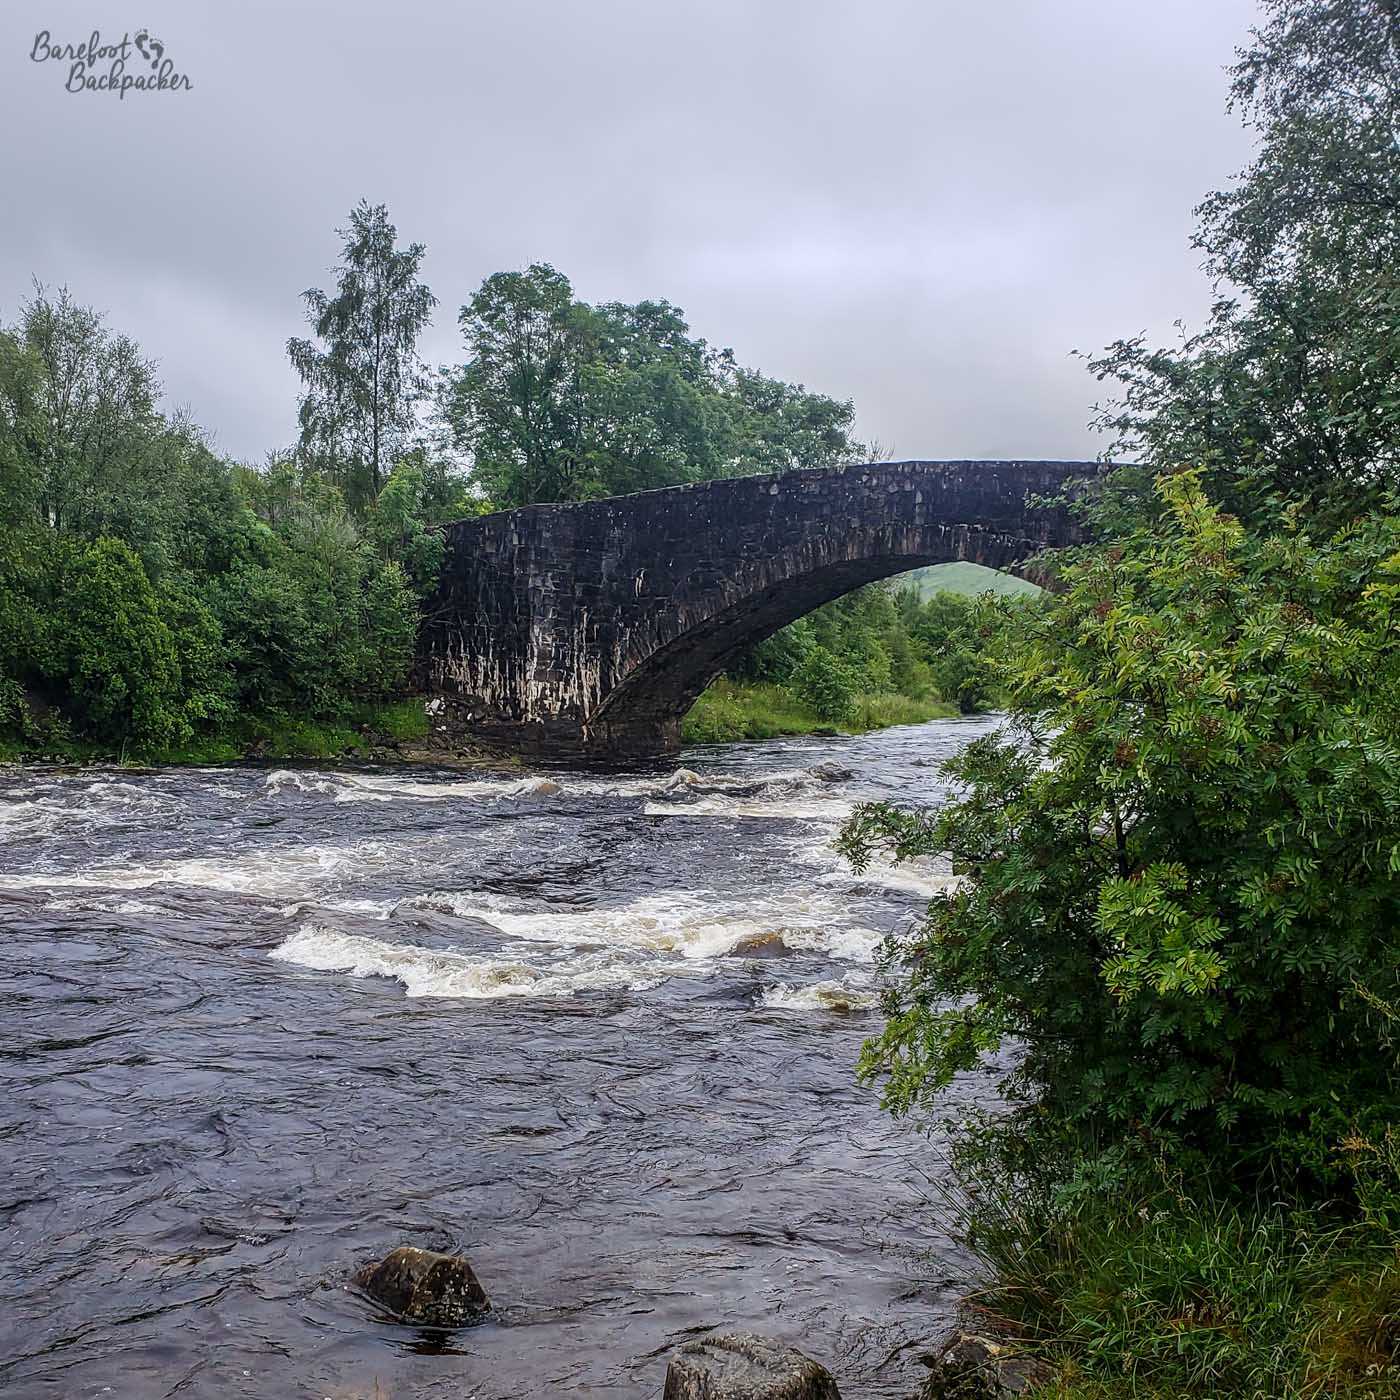 Old stone bridge, looking quite worn, with a sharp arch stands above a fast-flowing river running over a few stones causing swell. There are trees and bushes either side of the river that make it feel quite hemmed in.